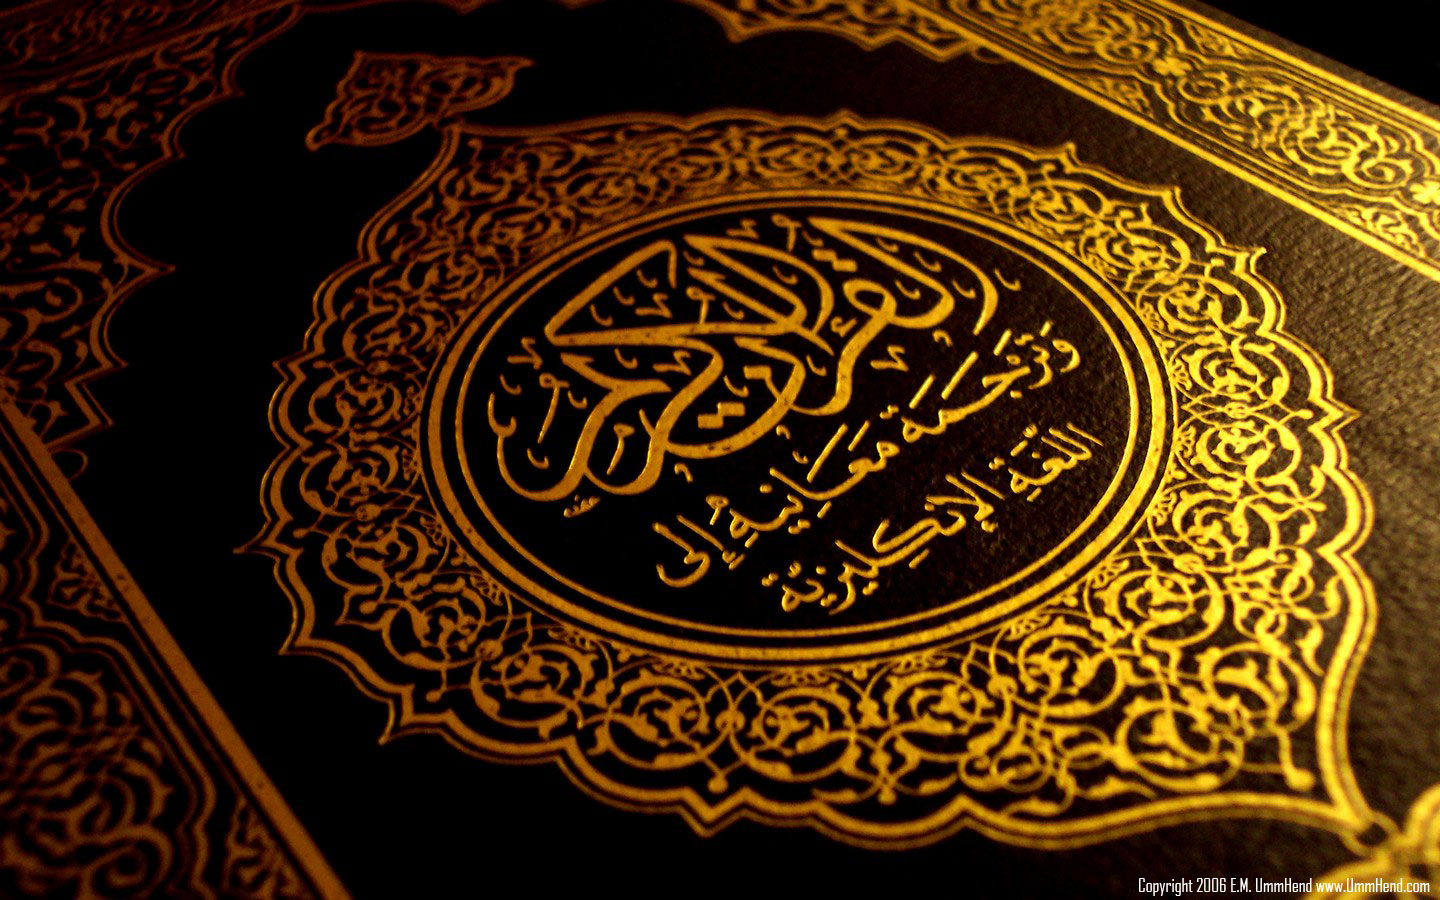 All About the Qur’an (1-10)